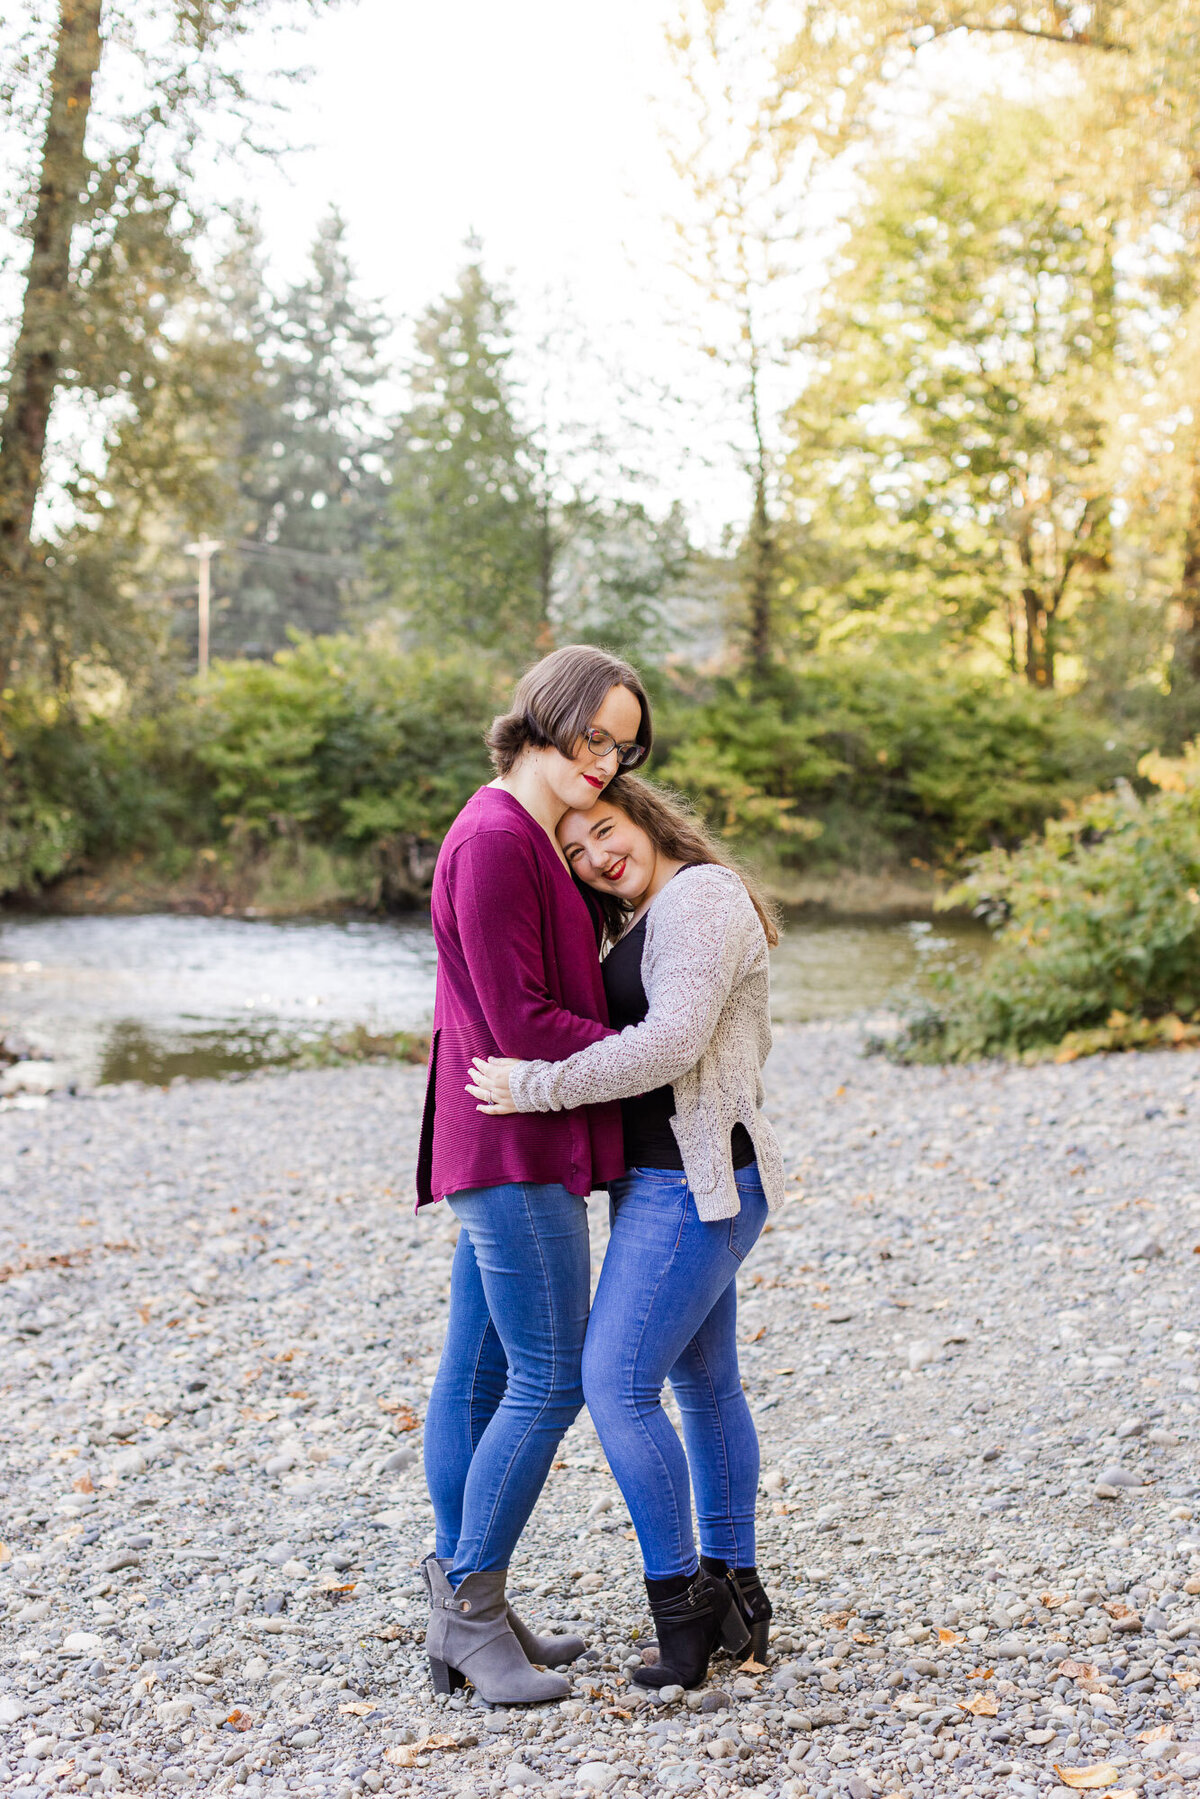 PNW LGBTQ river engagement session at Snohomish river happy couple hugging and smiling candid photo by Joanna Monger Photography